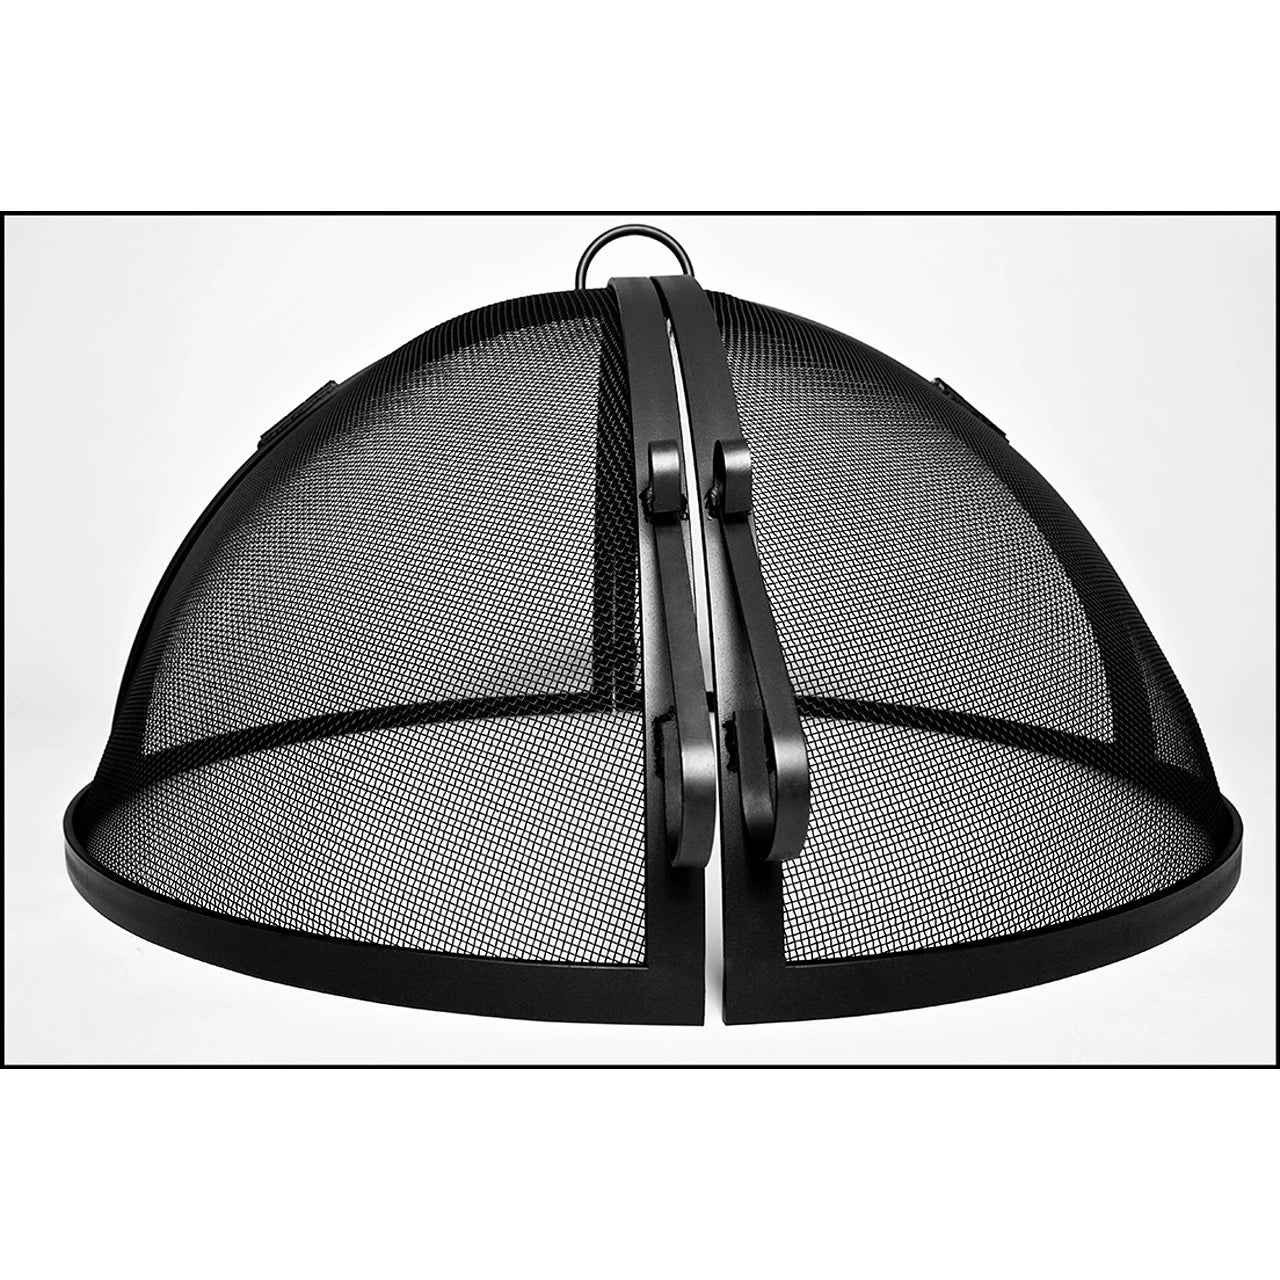 Dome Fire Pit Cover | Steel | Hinged Round Fire Pit Screen Cover 20″- 29″